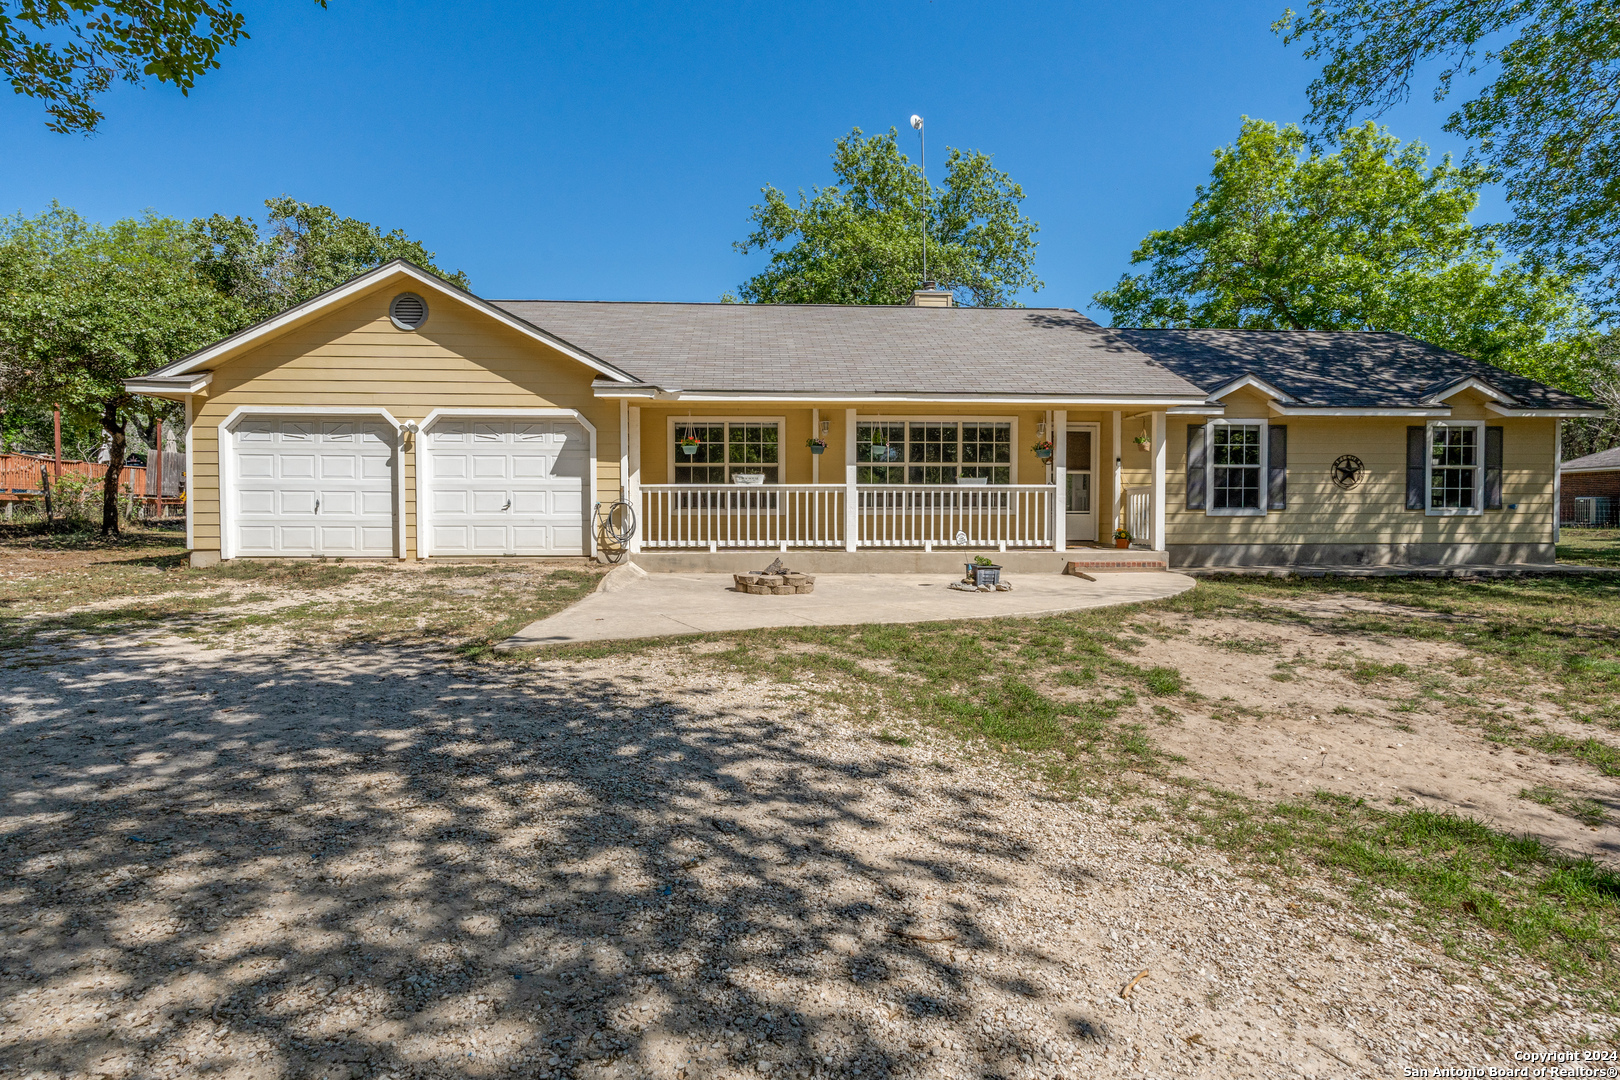 Photo of 1108 Clover Ct in Adkins, TX